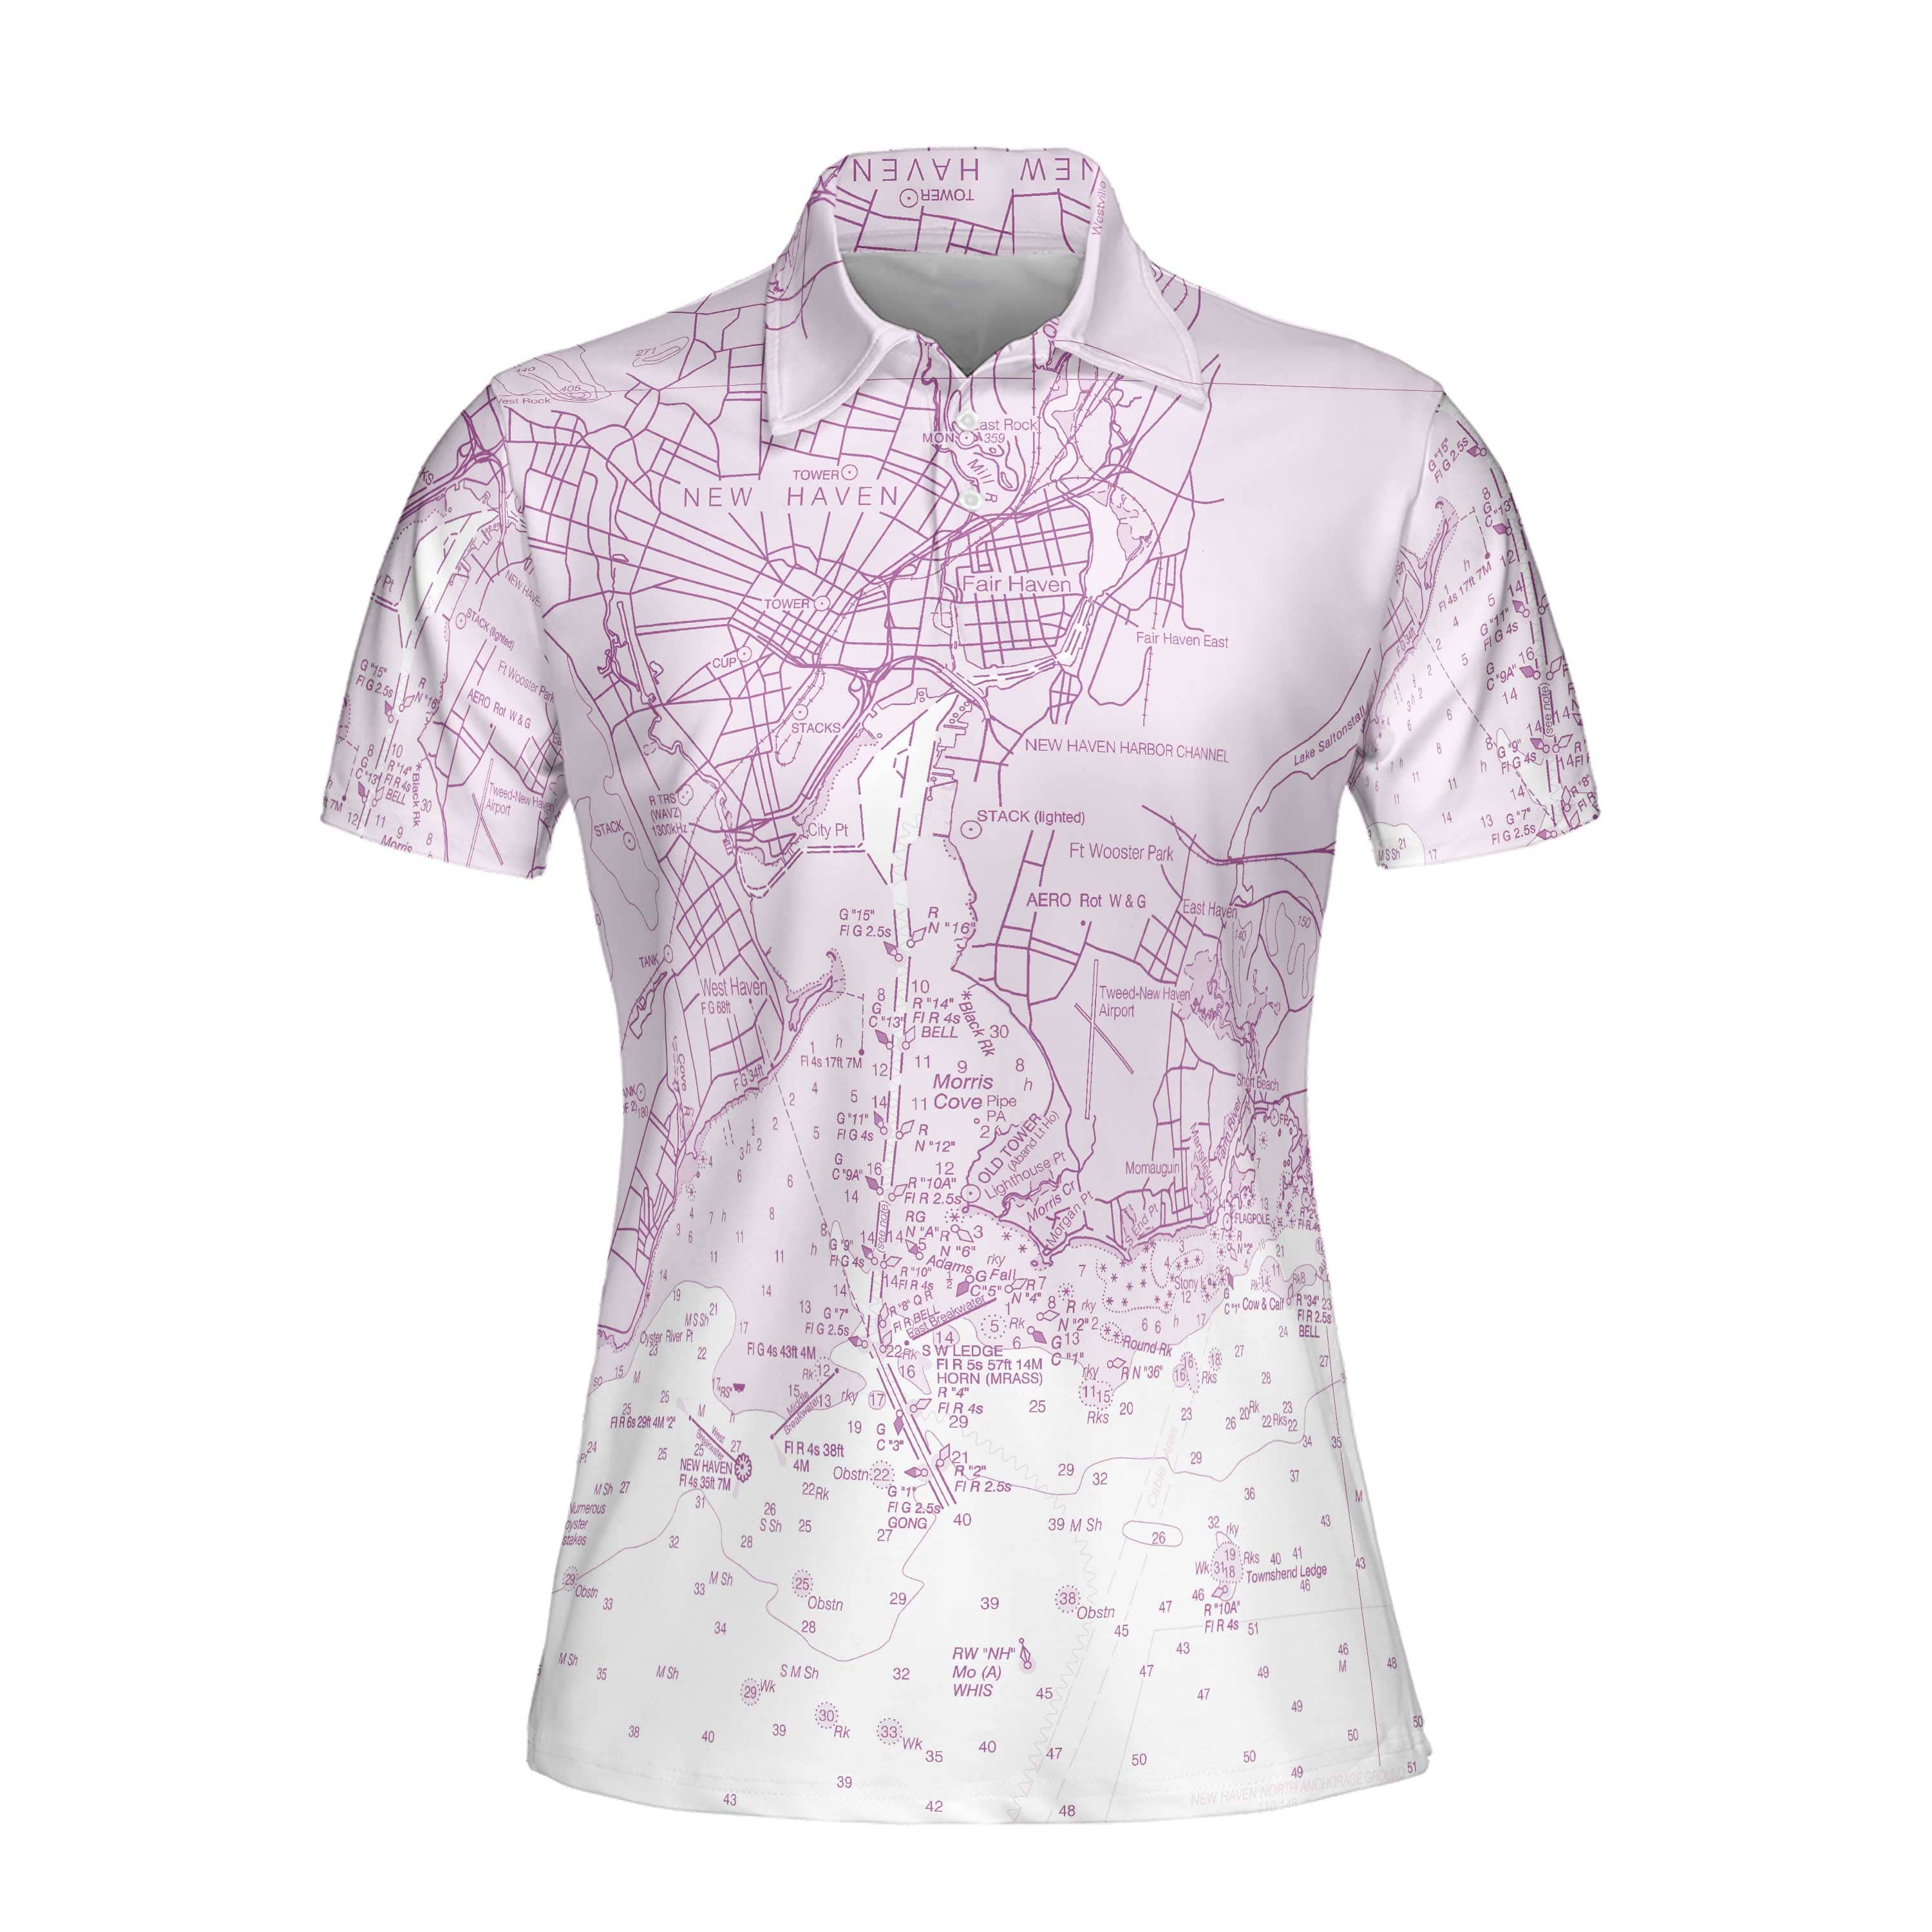 The New Haven Pink Women's Polo